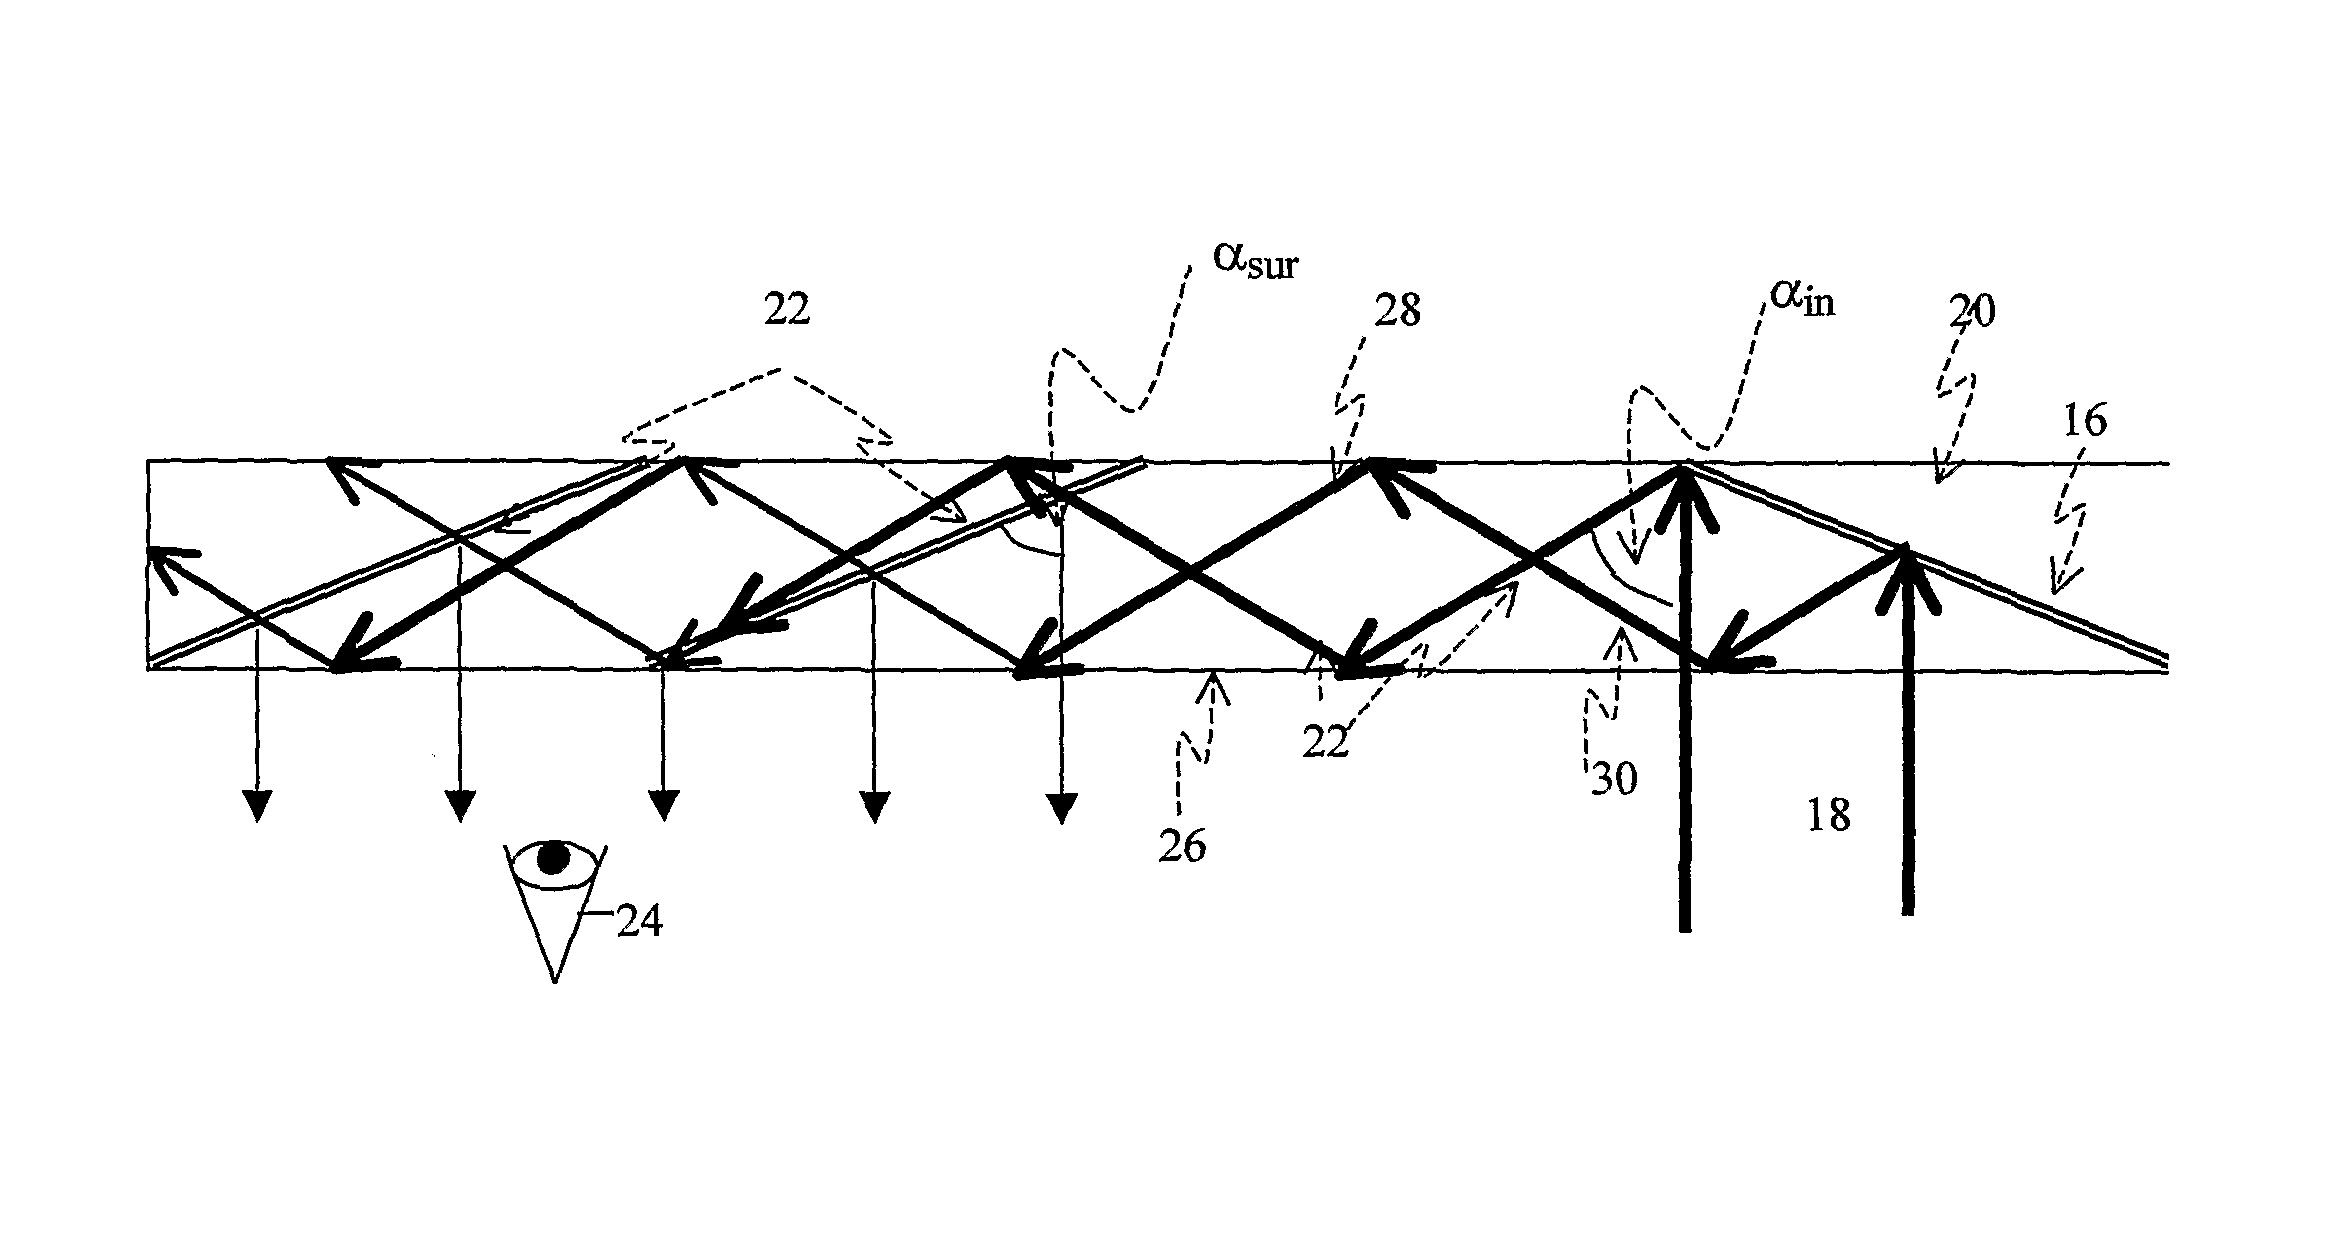 Substrate-guide optical device utilizing polarization beam splitters